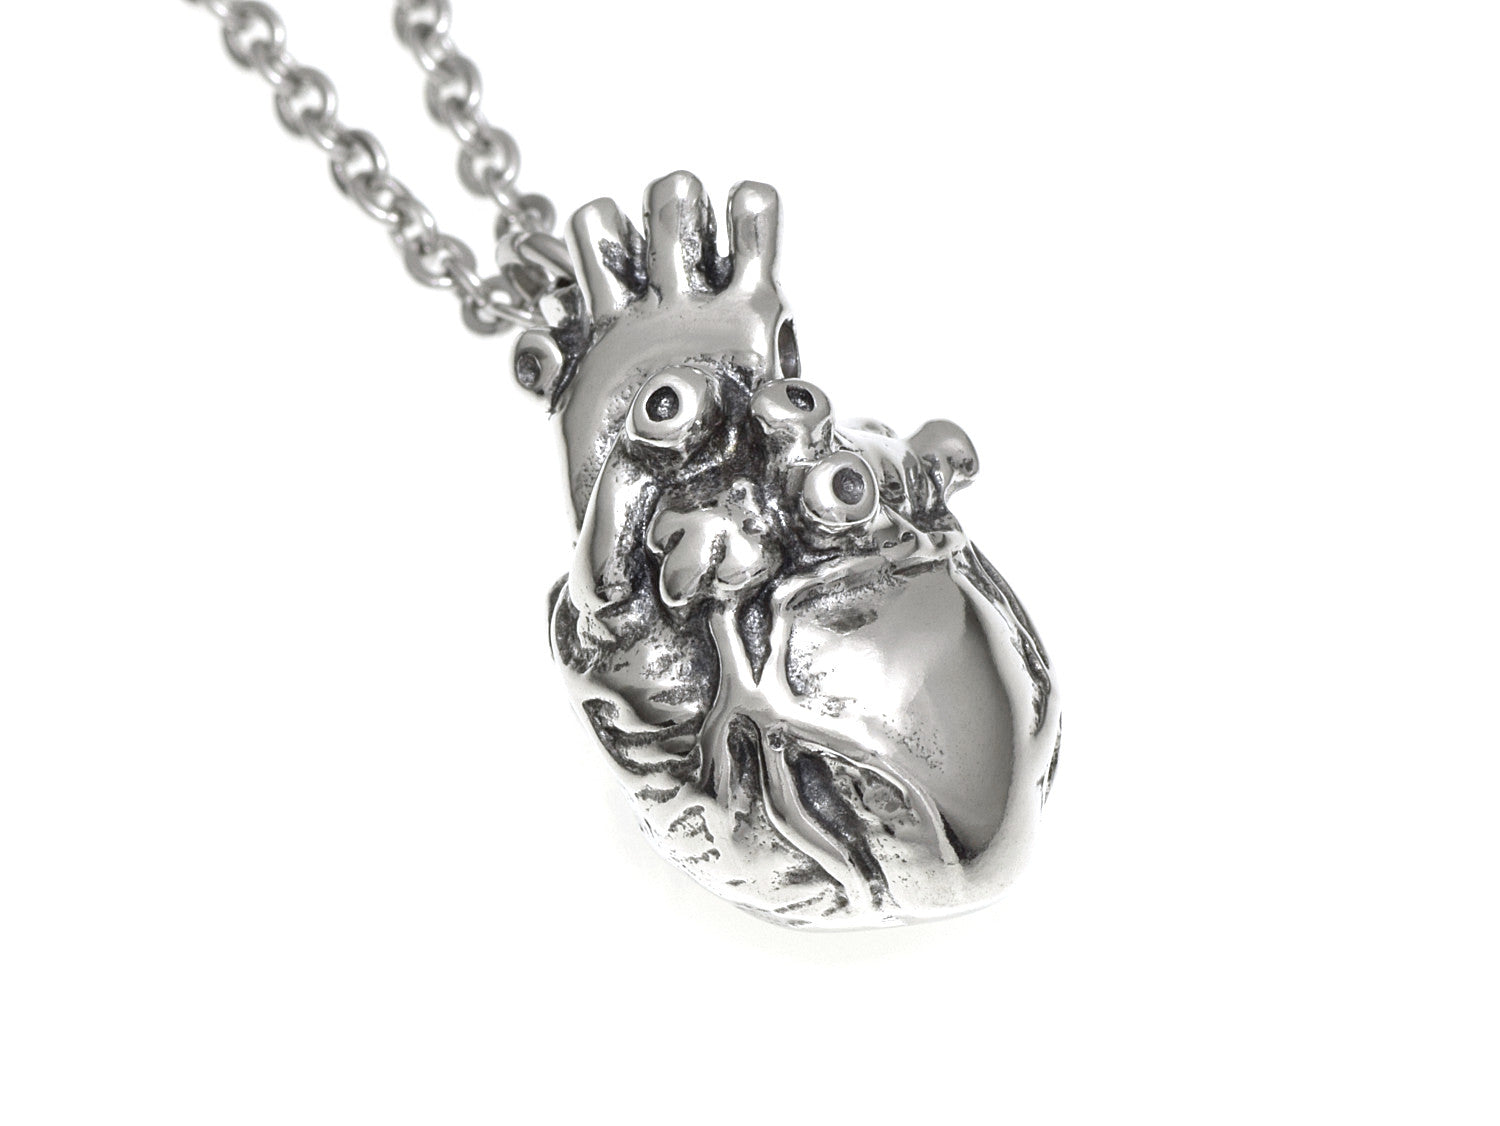 Silver Anatomical Heart Necklace